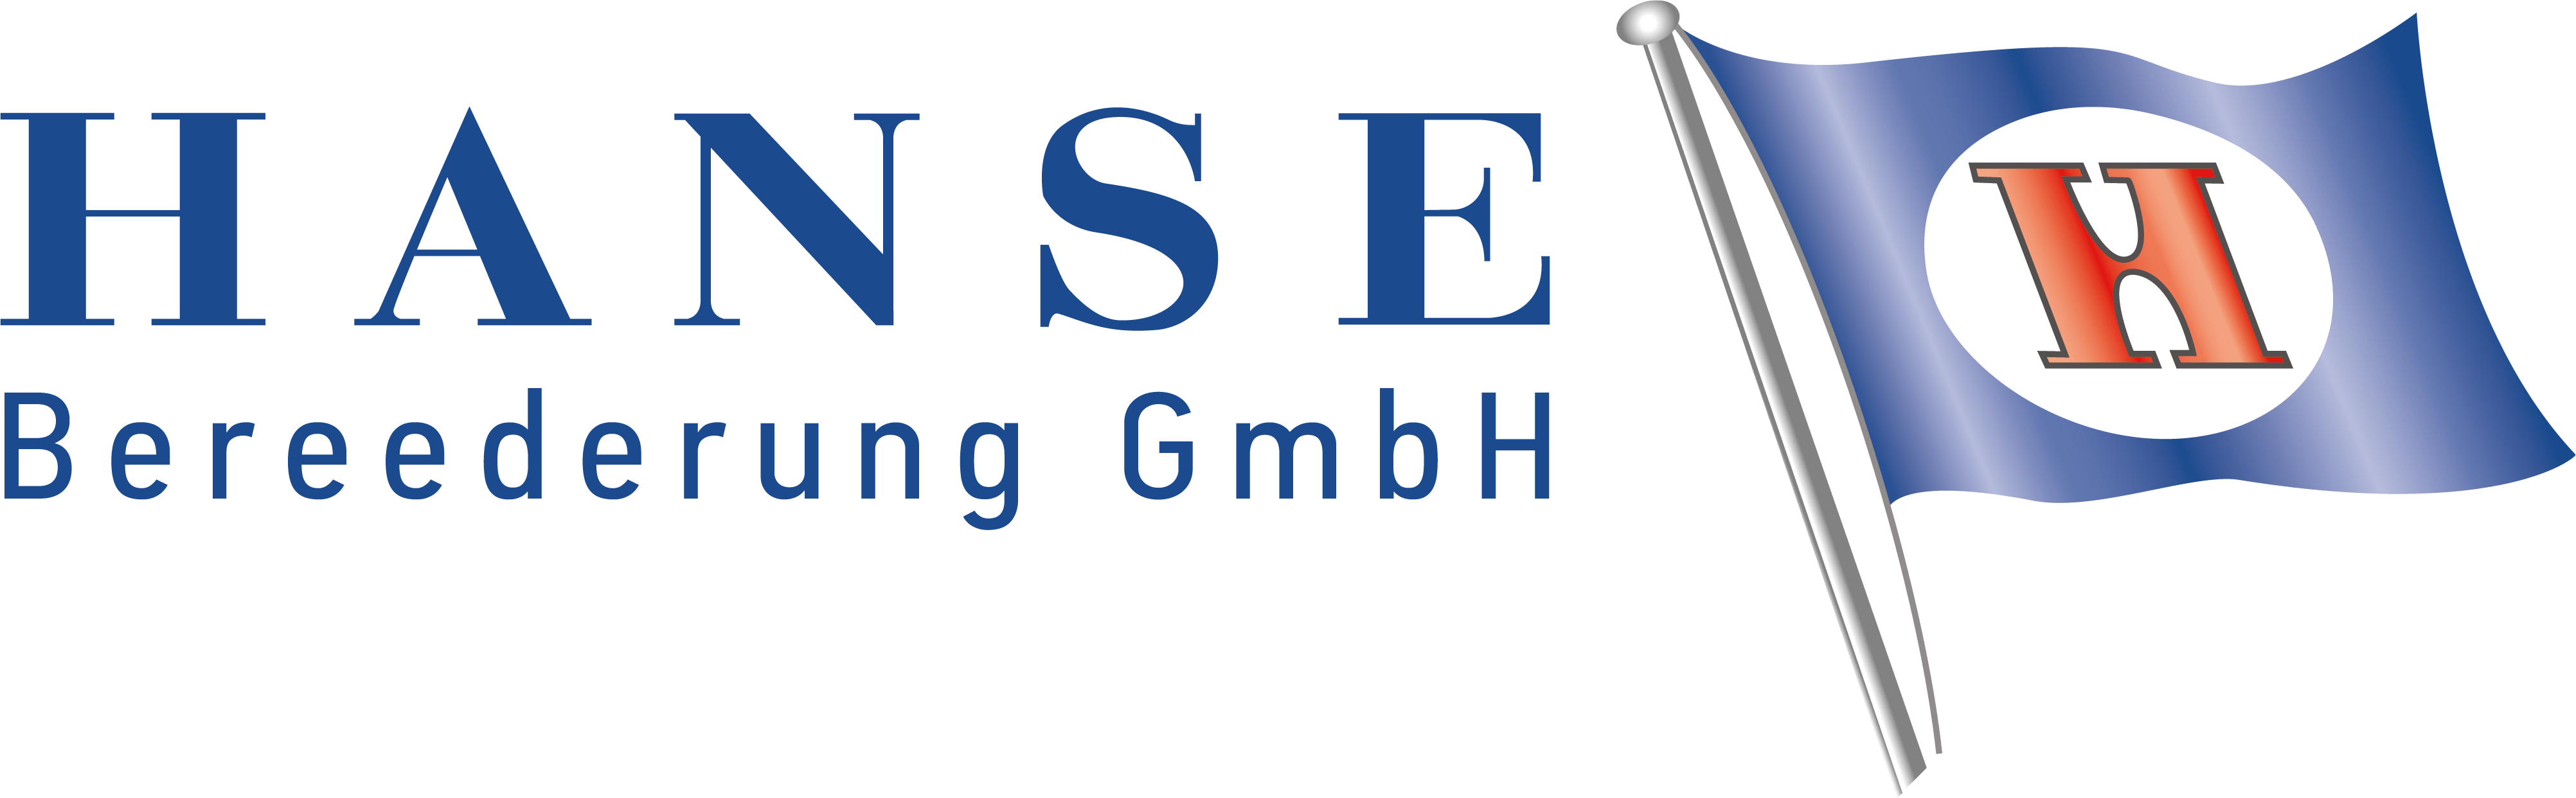 Hanse Bereederun Chartering Sales and Purchase